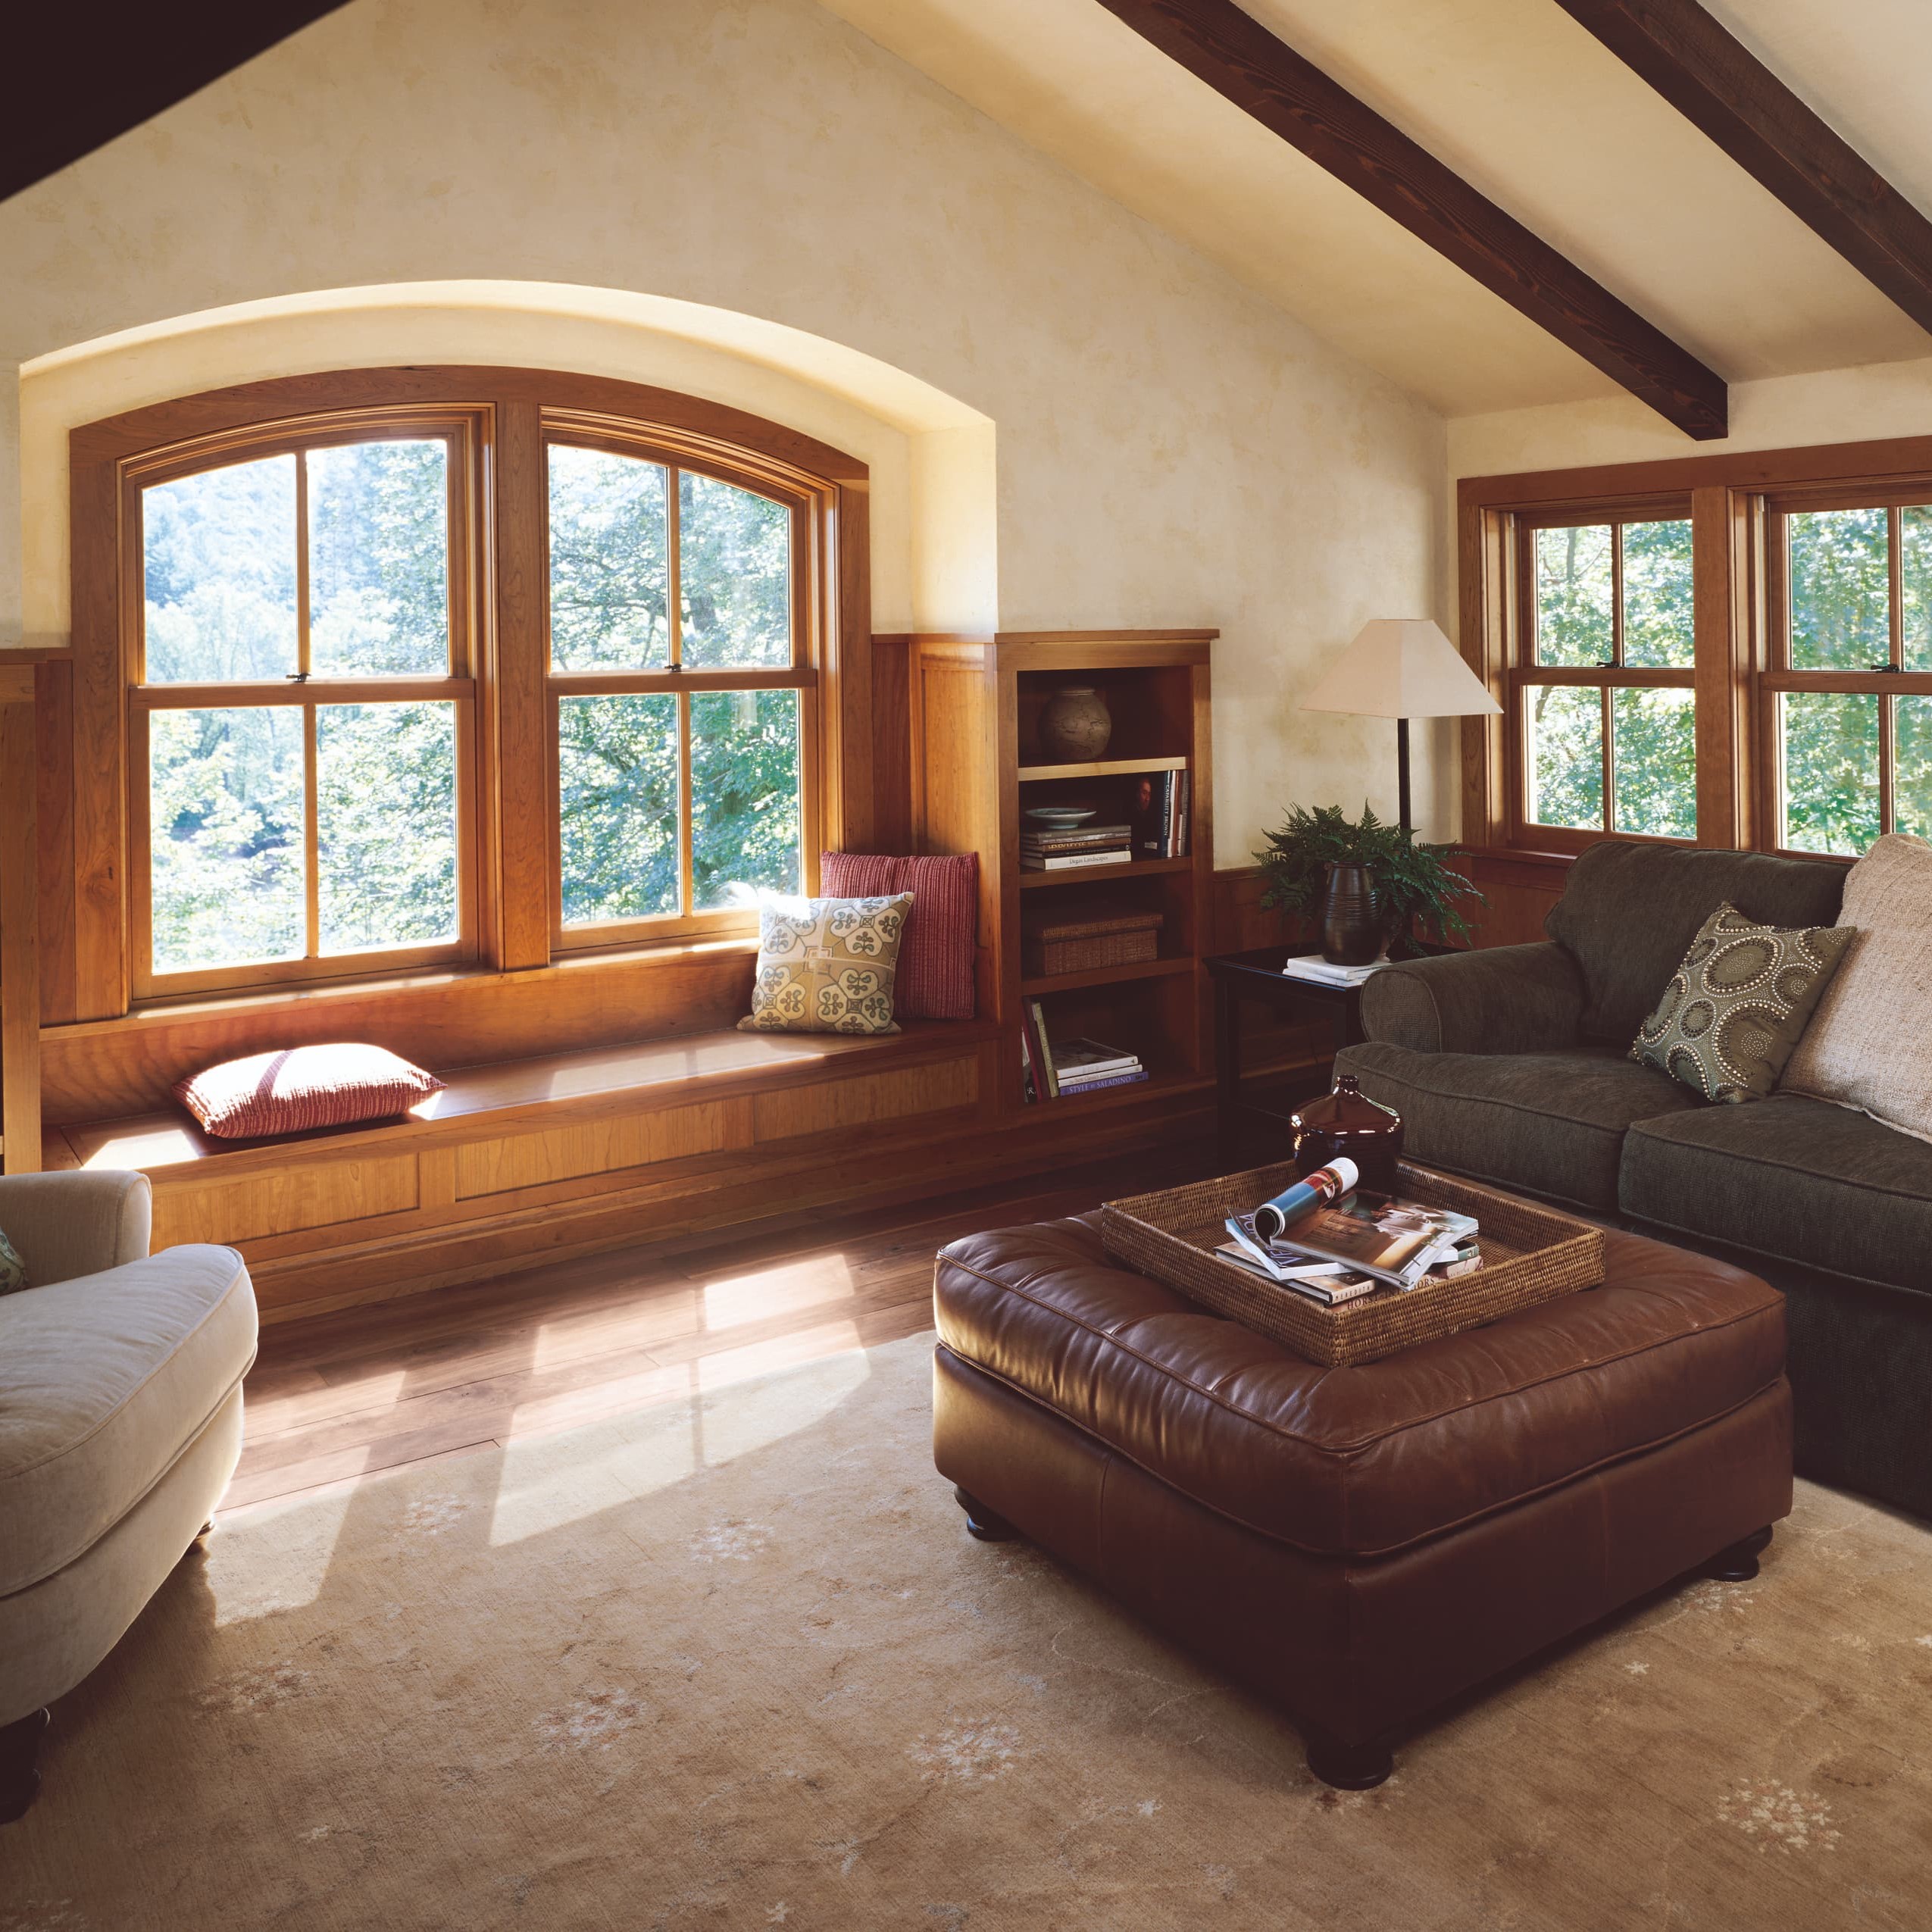 Double hung windows in upstairs lounge